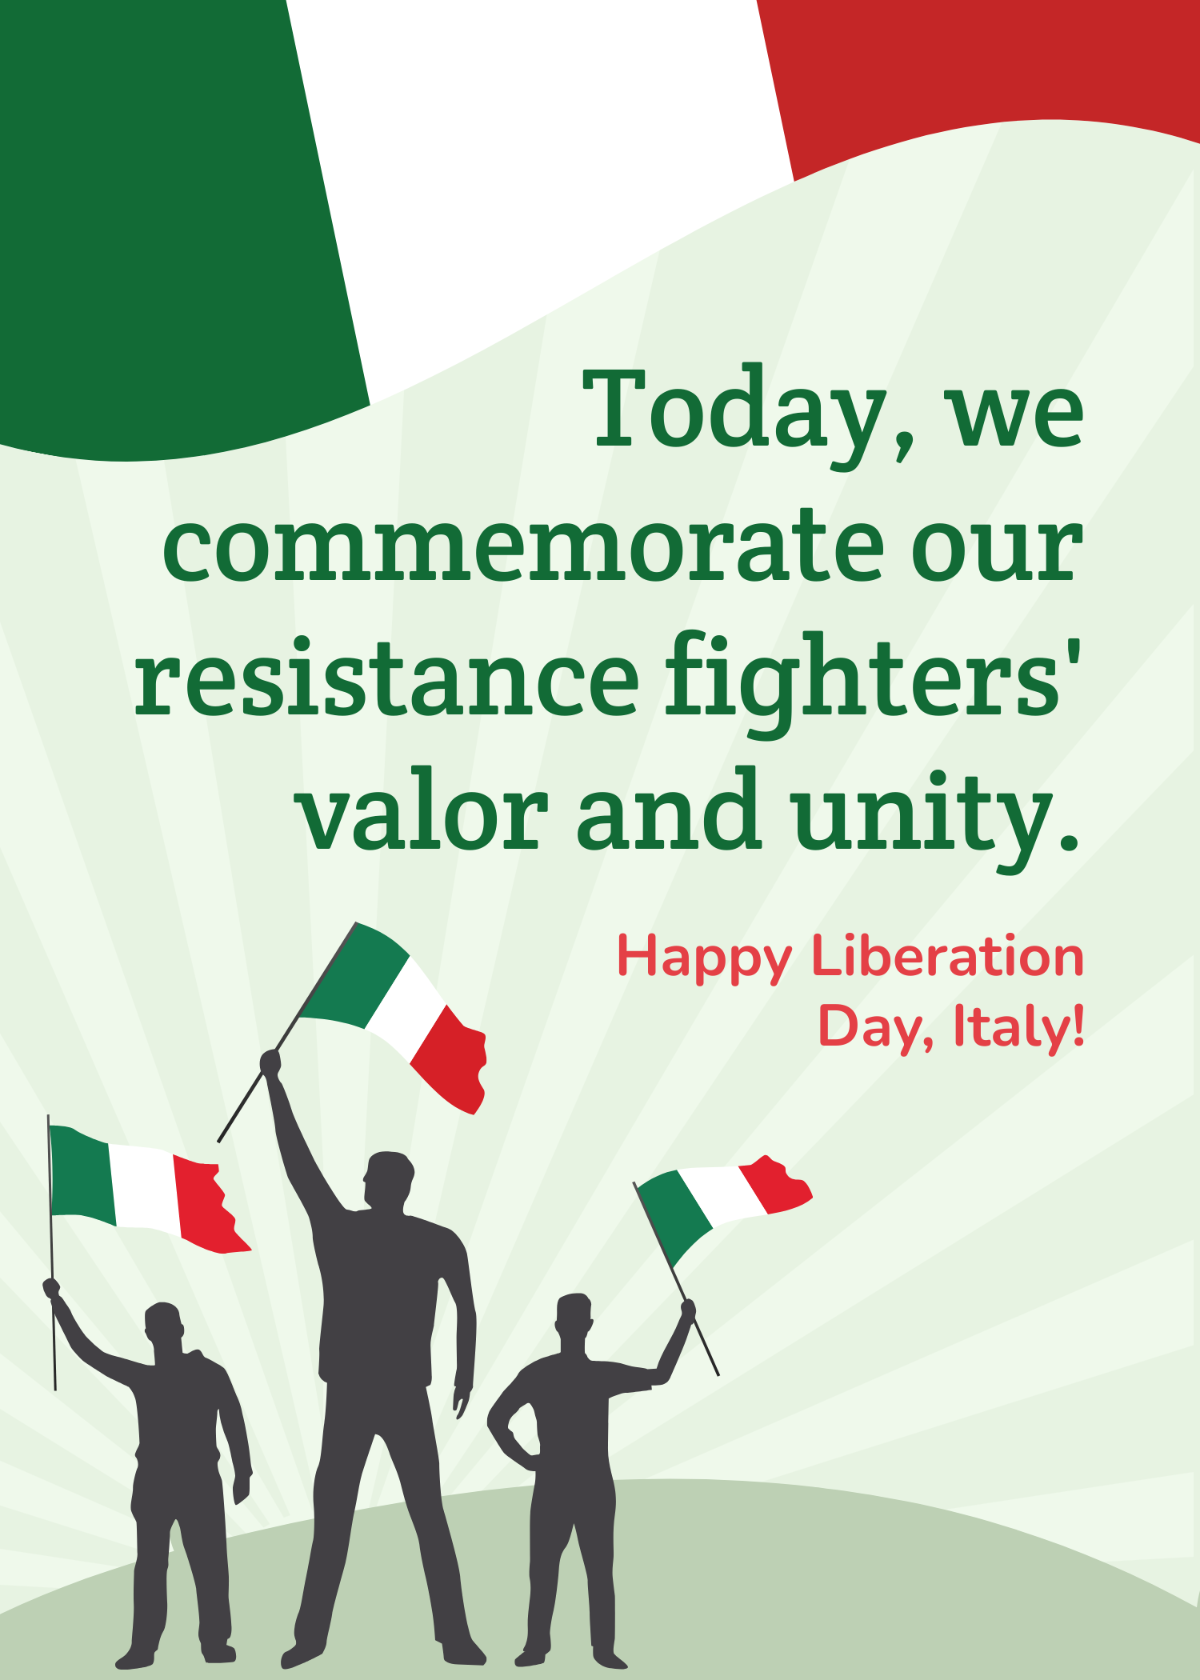 Italy Liberation Day Greeting Card Template